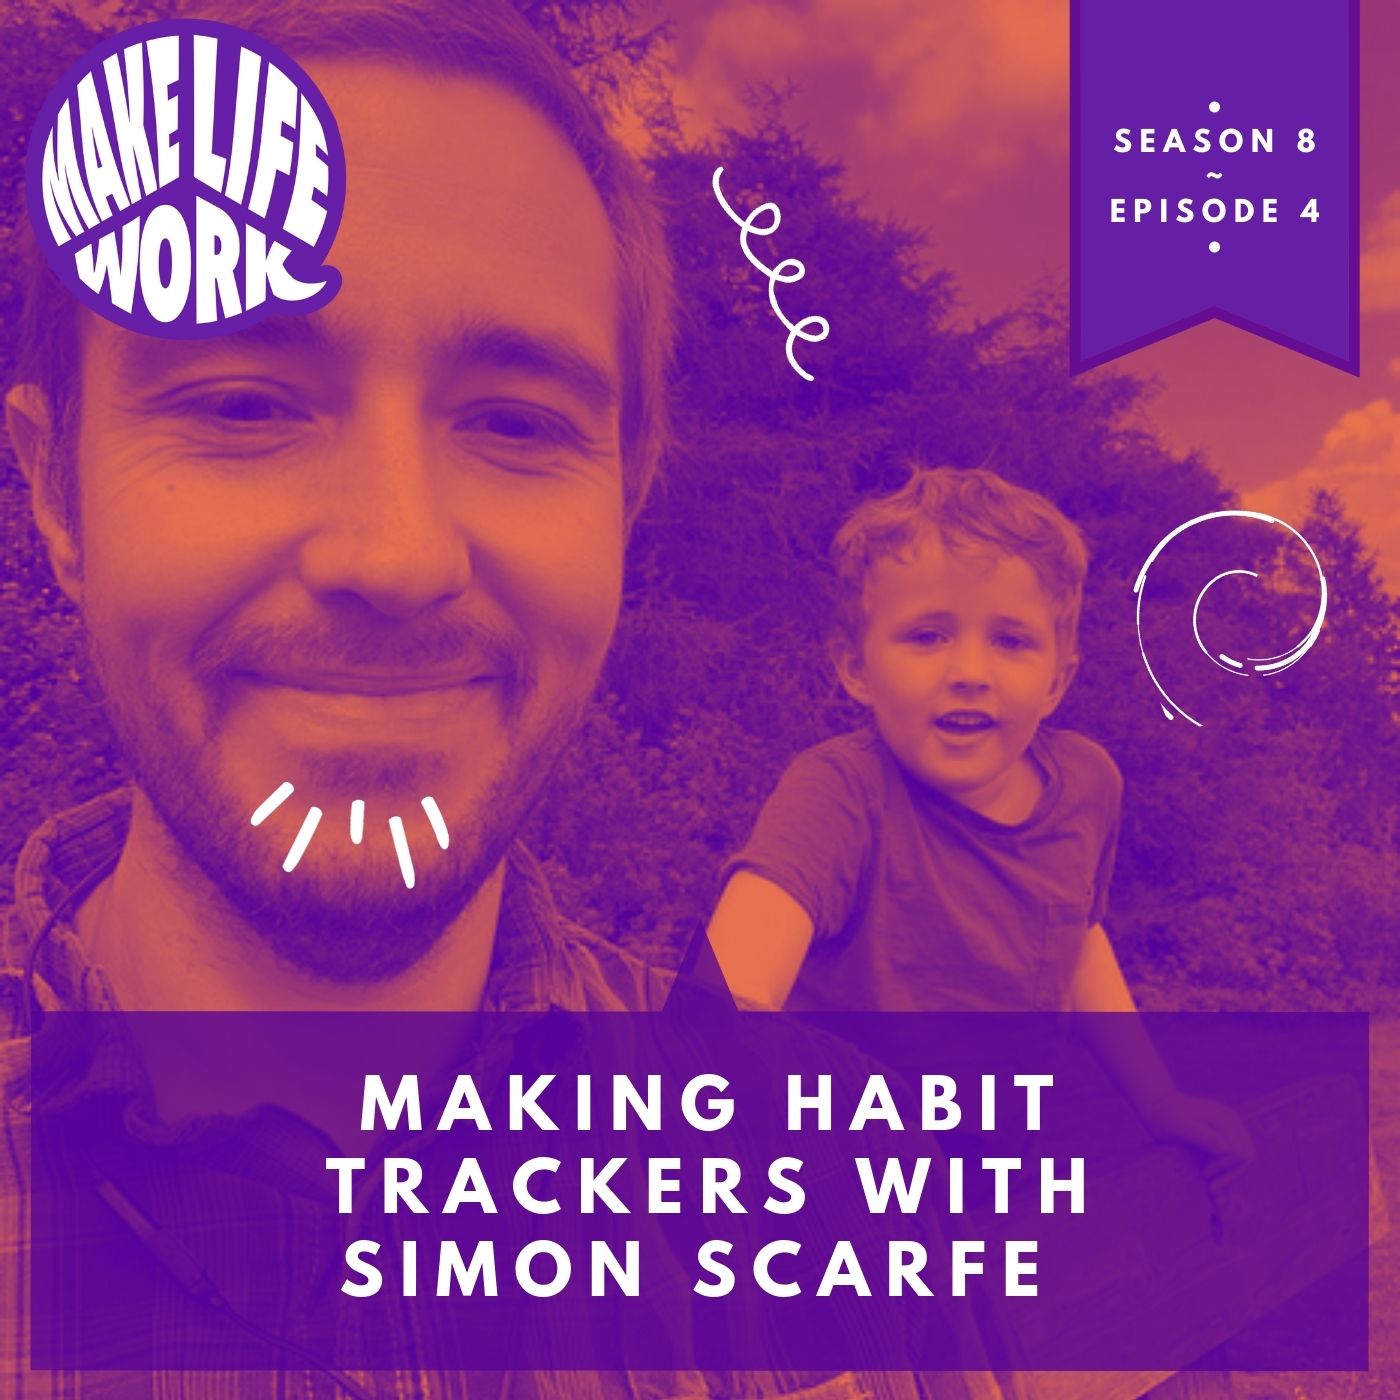 Making habit trackers with Simon Scarfe